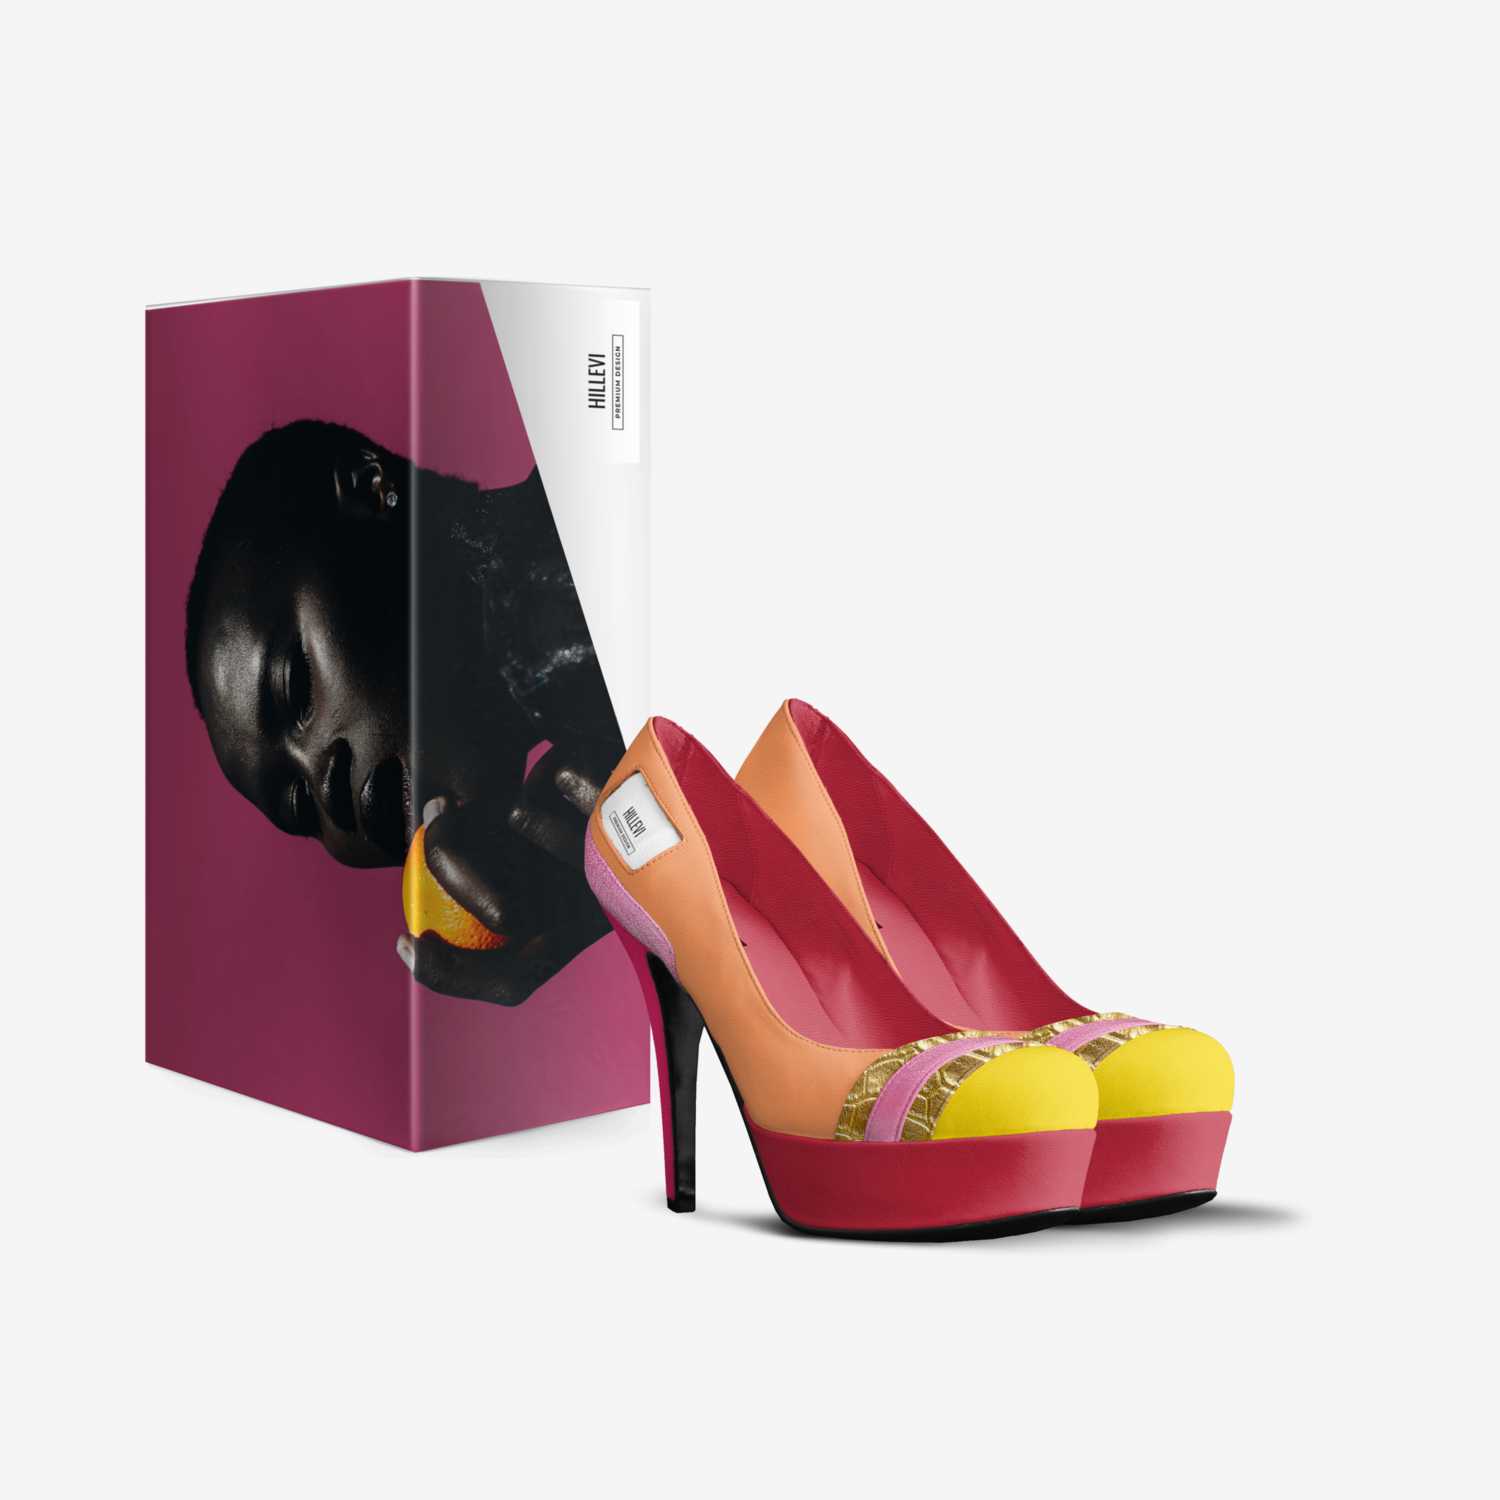 HILLEVI custom made in Italy shoes by Julia | Box view